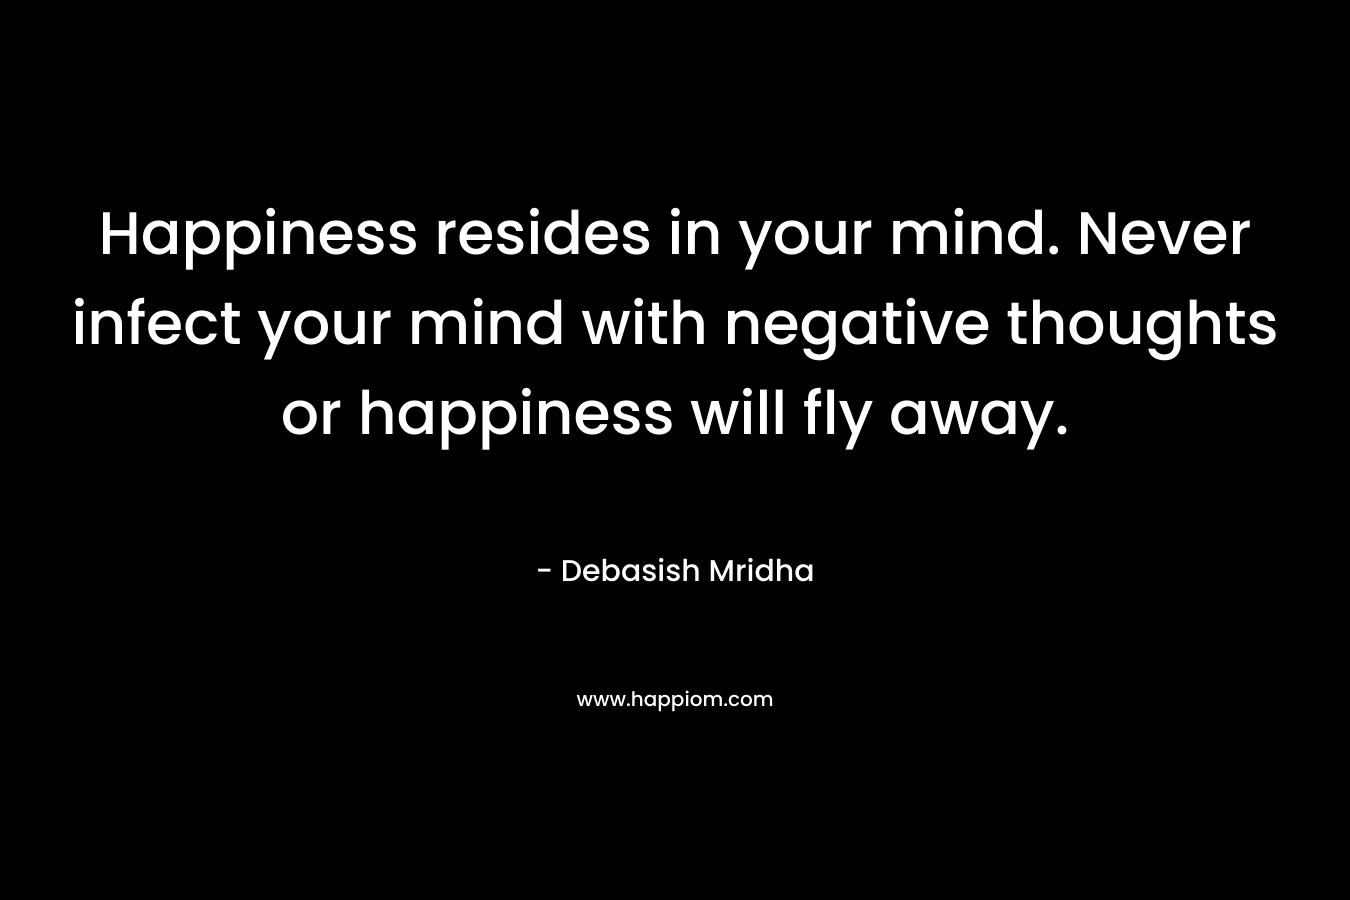 Happiness resides in your mind. Never infect your mind with negative thoughts or happiness will fly away.